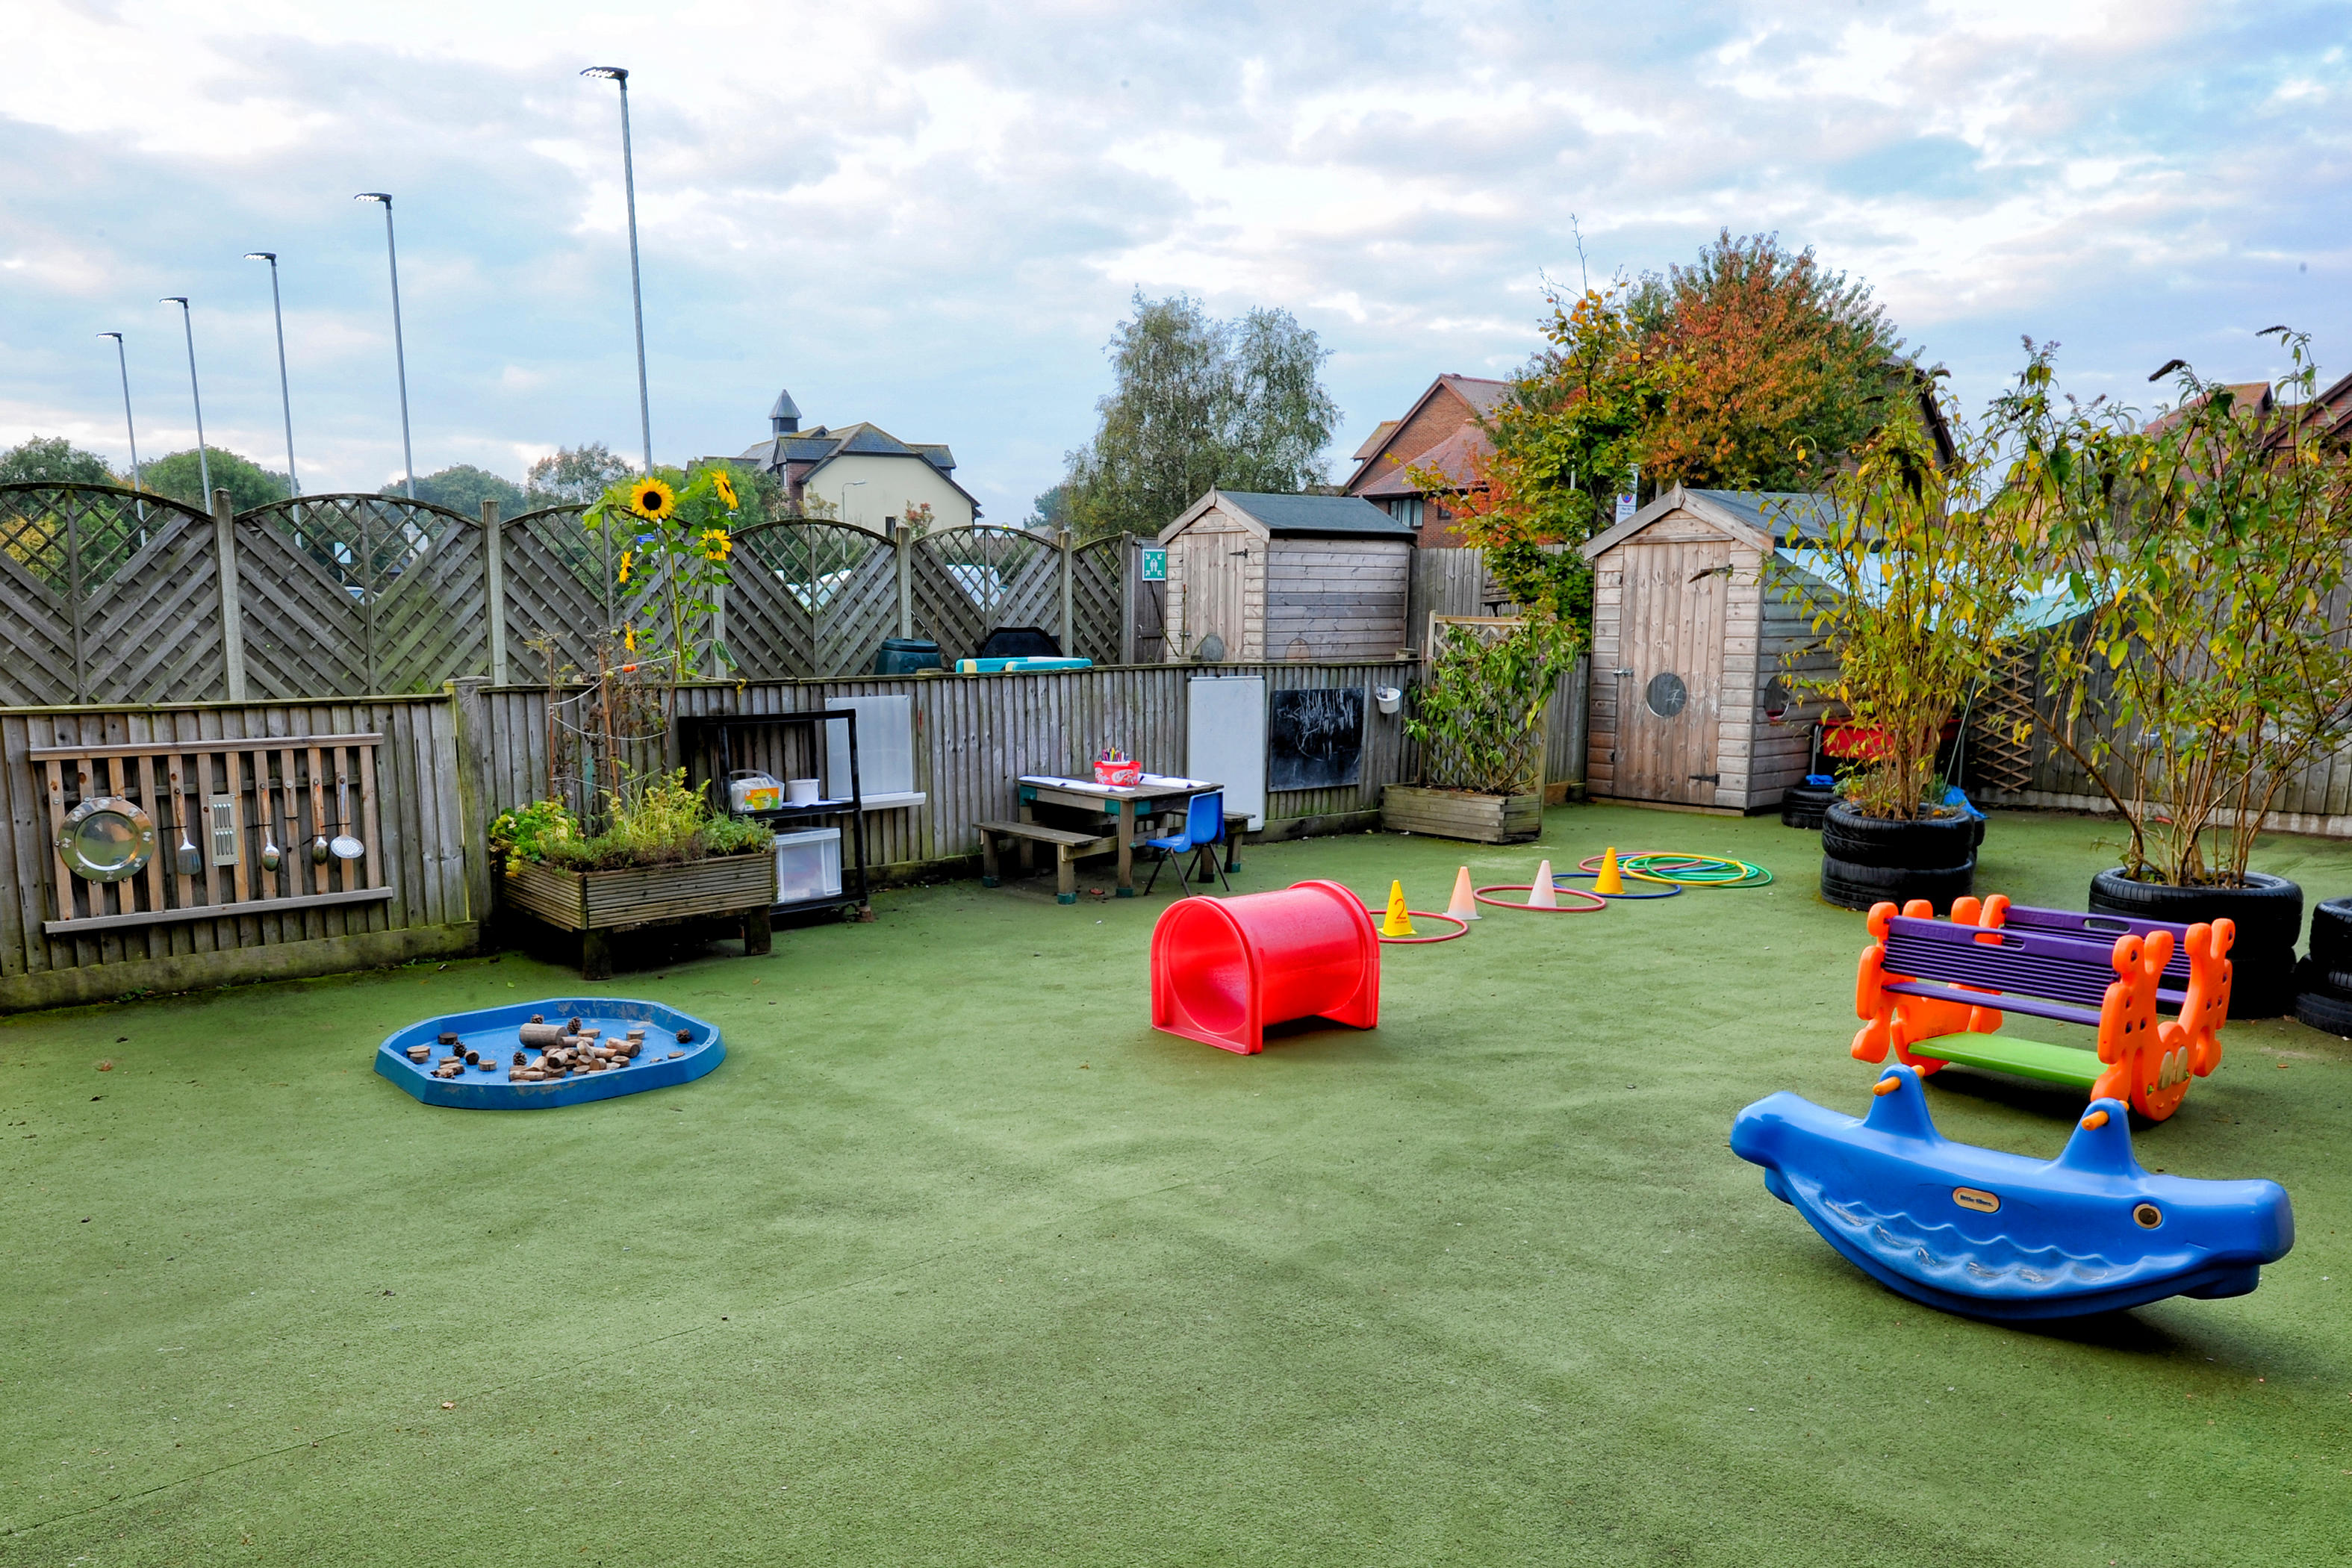 Bright Horizons Talbot Woods Day Nursery and Preschool Poole 03339 207571